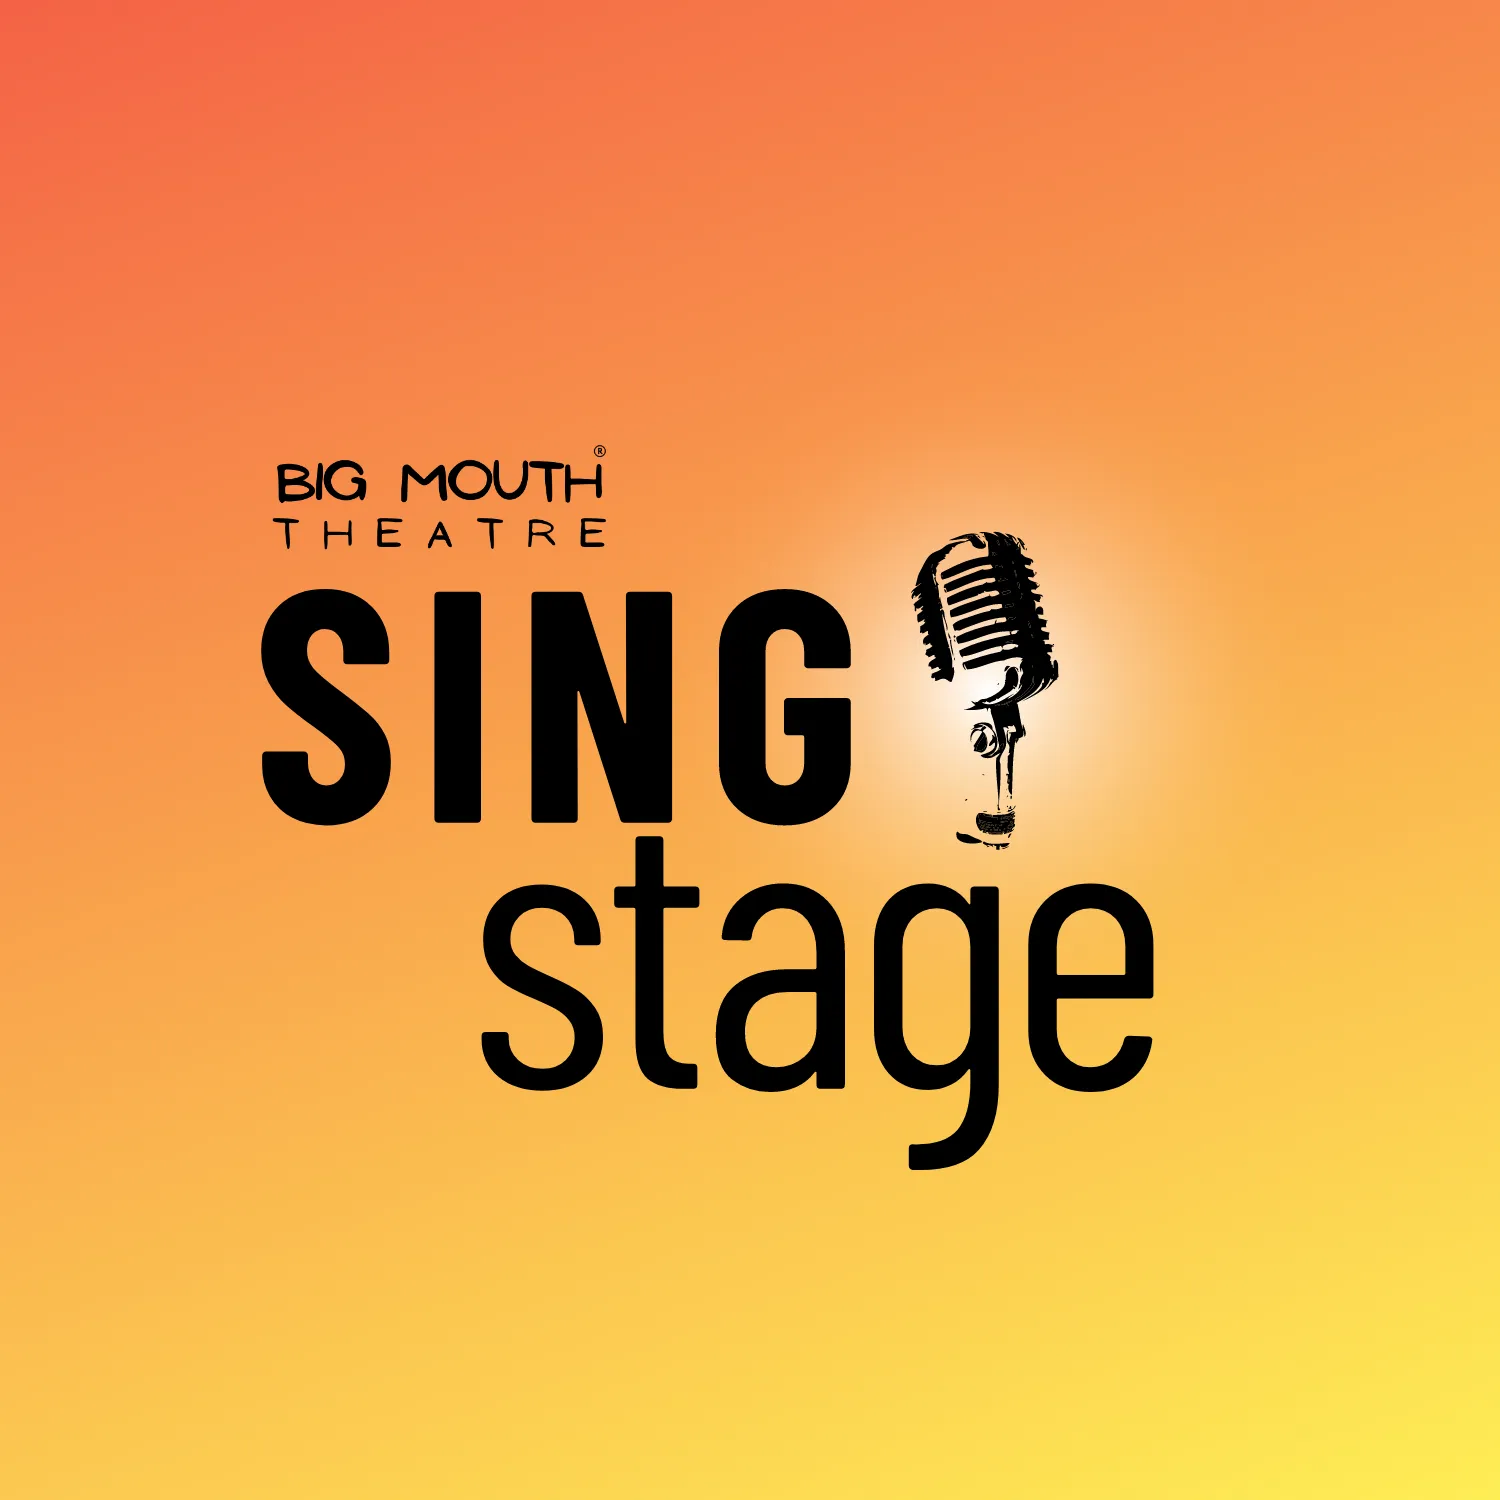 Big Mouth Theatre StageSING logo